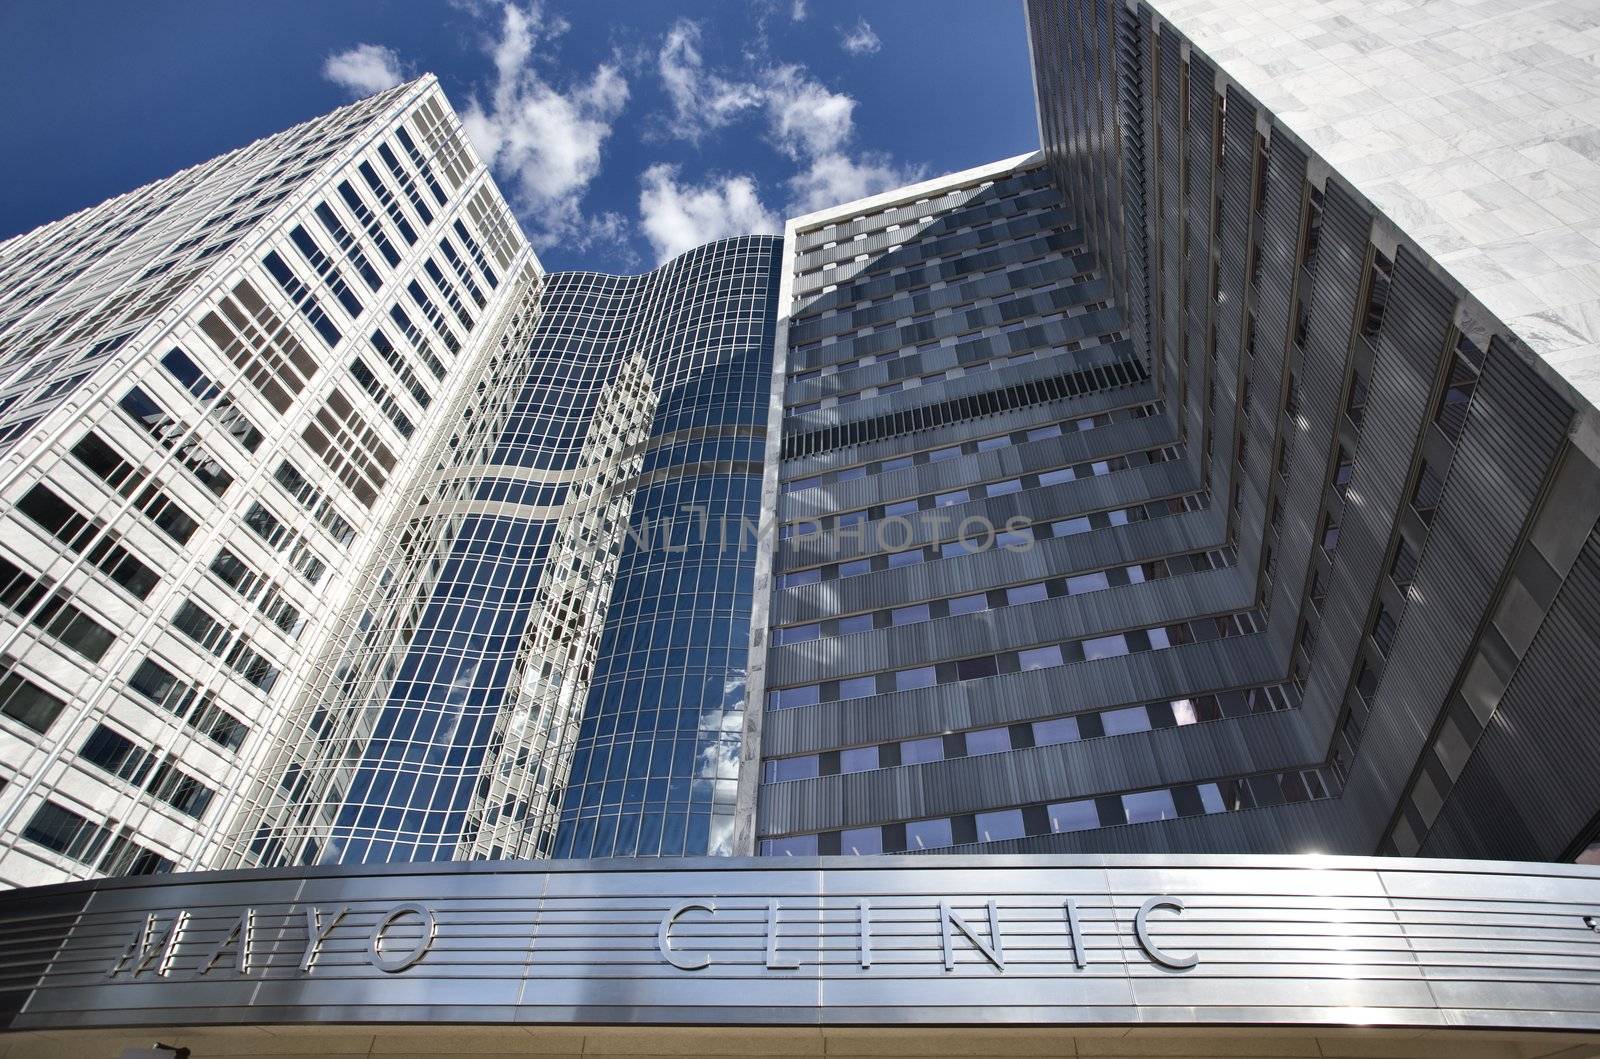 Mayo Clinic by pictureguy